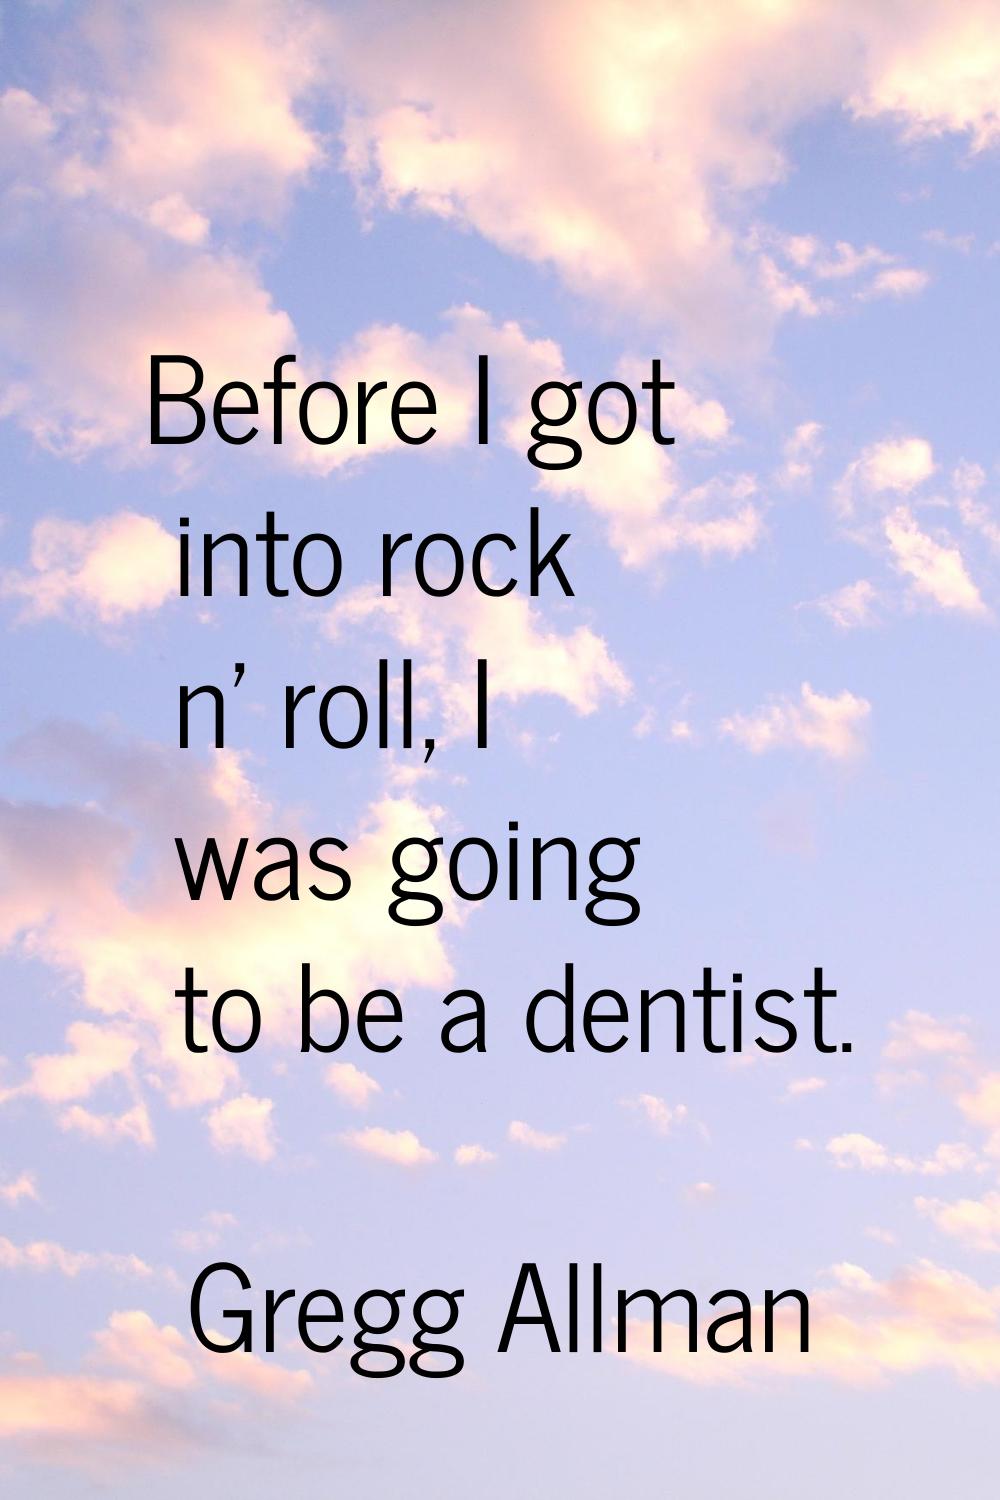 Before I got into rock n' roll, I was going to be a dentist.